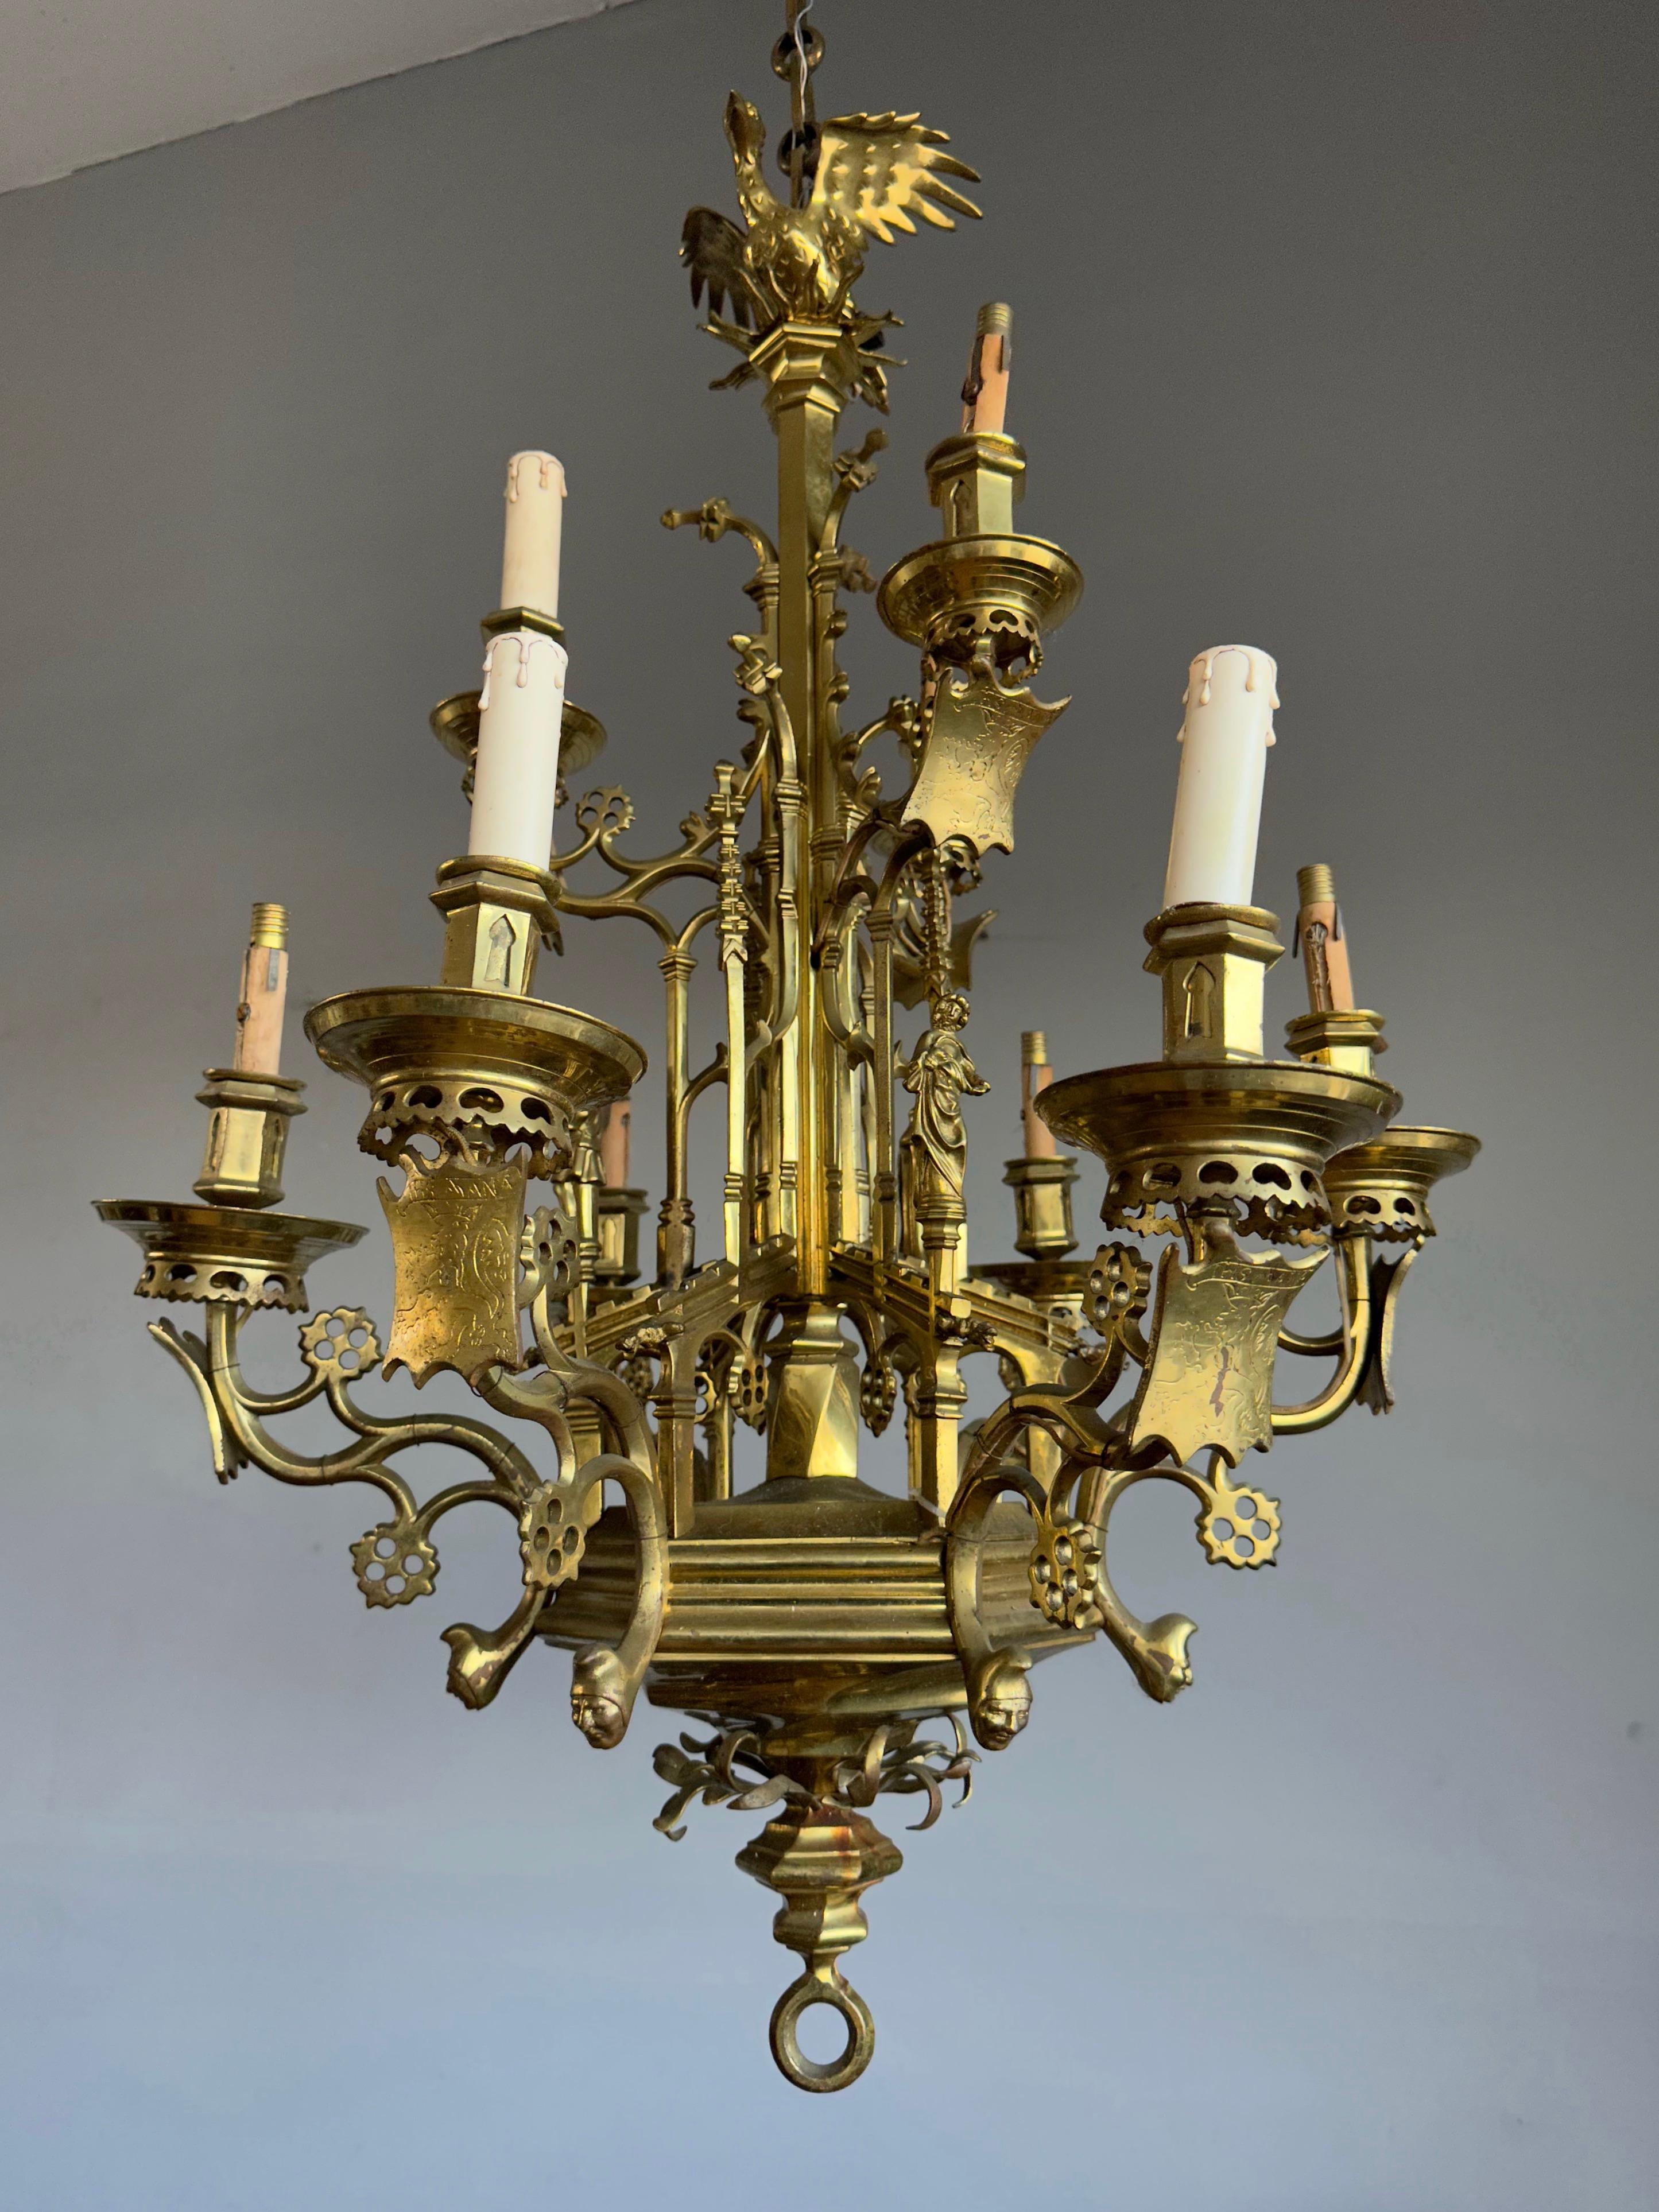 Awesome Antique Bronze Gothic Art Nine Light Chandelier with Phoenix Sculpture For Sale 6